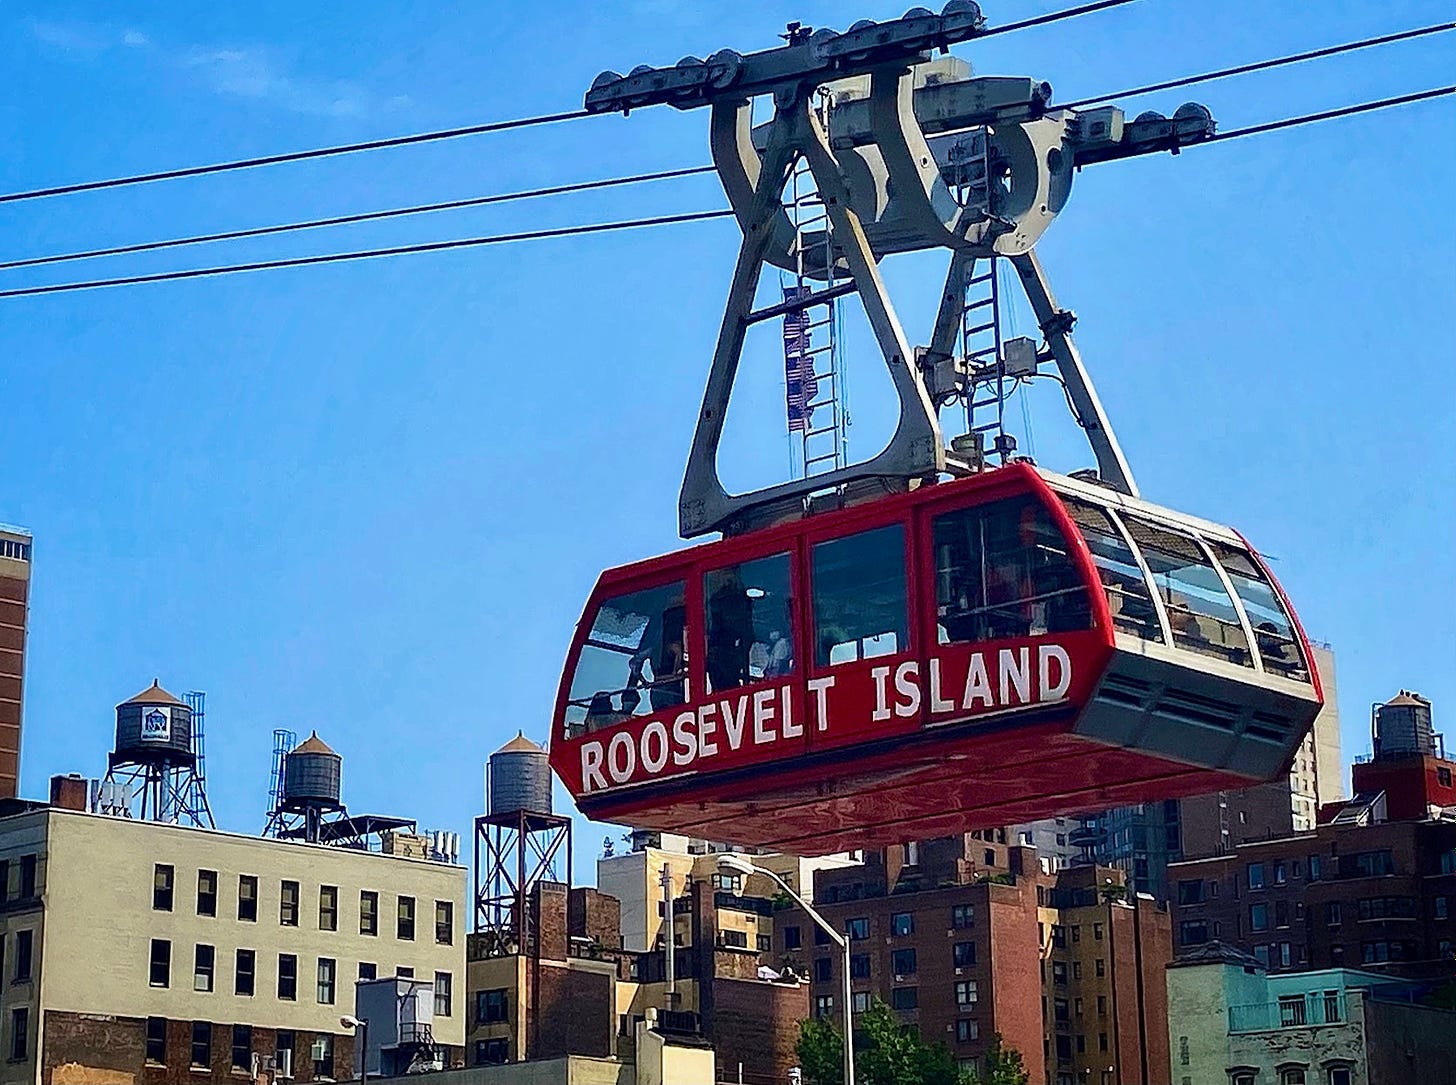 The Roosevelt Island tram suspended in front of four water towers.